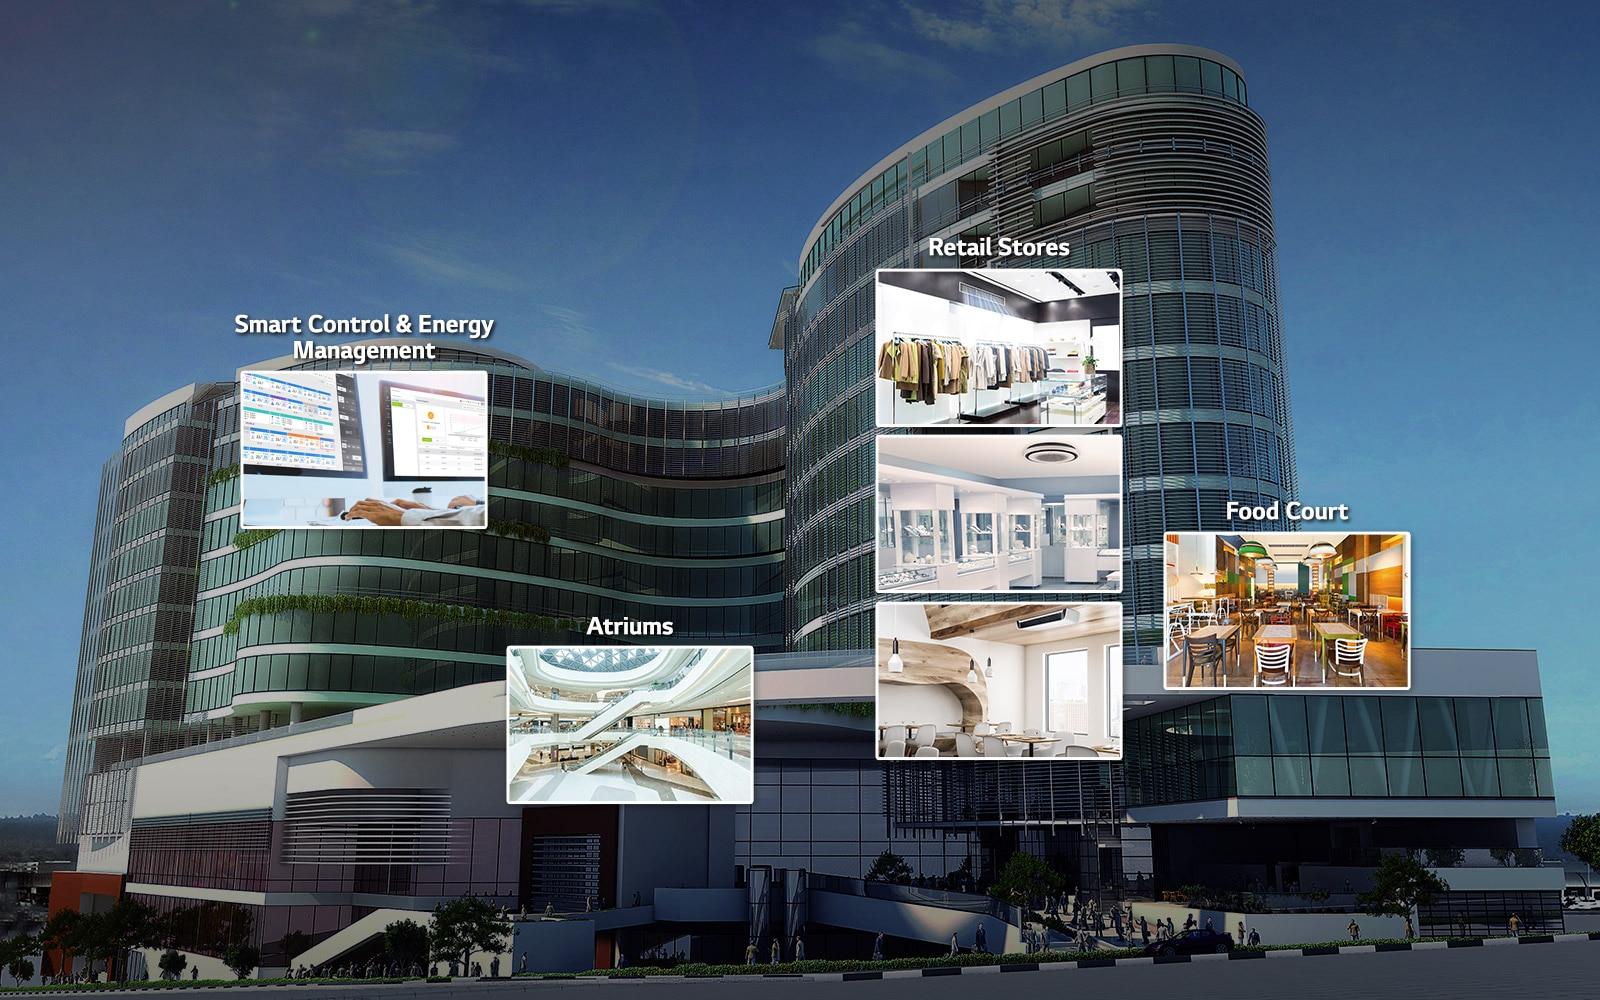 An image of a shopping mall with thumbnails of an atrium, retail stores, a food court, and a control center.